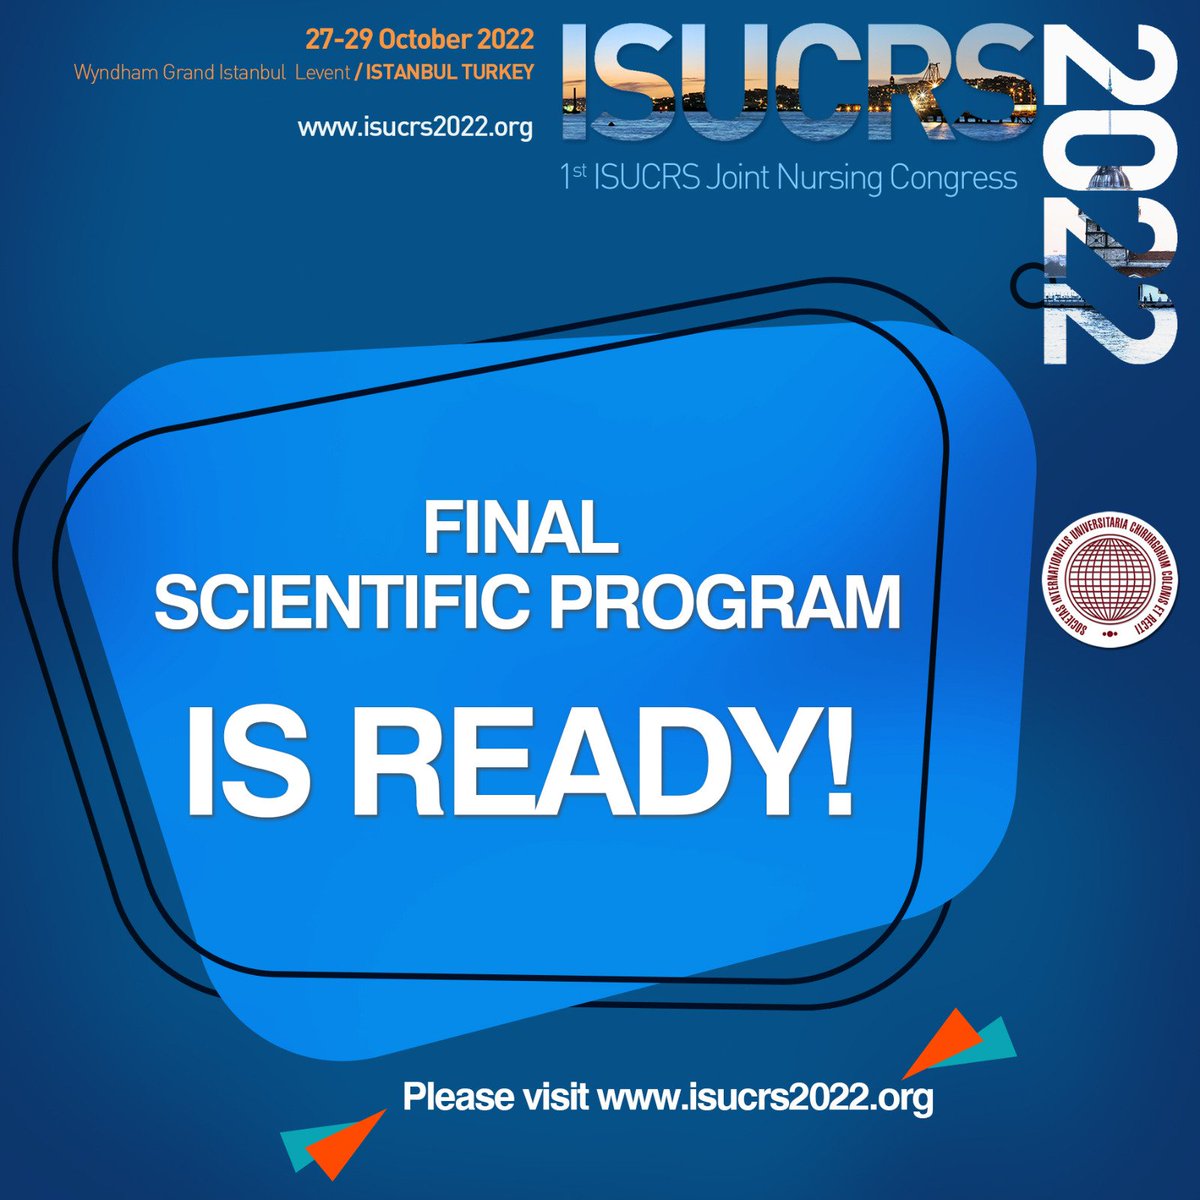 We are pleased to announce that our final scientific program is ready! Visit isucrs2022.org for details. #isucrs #isucrs2022 #isucrsistanbul